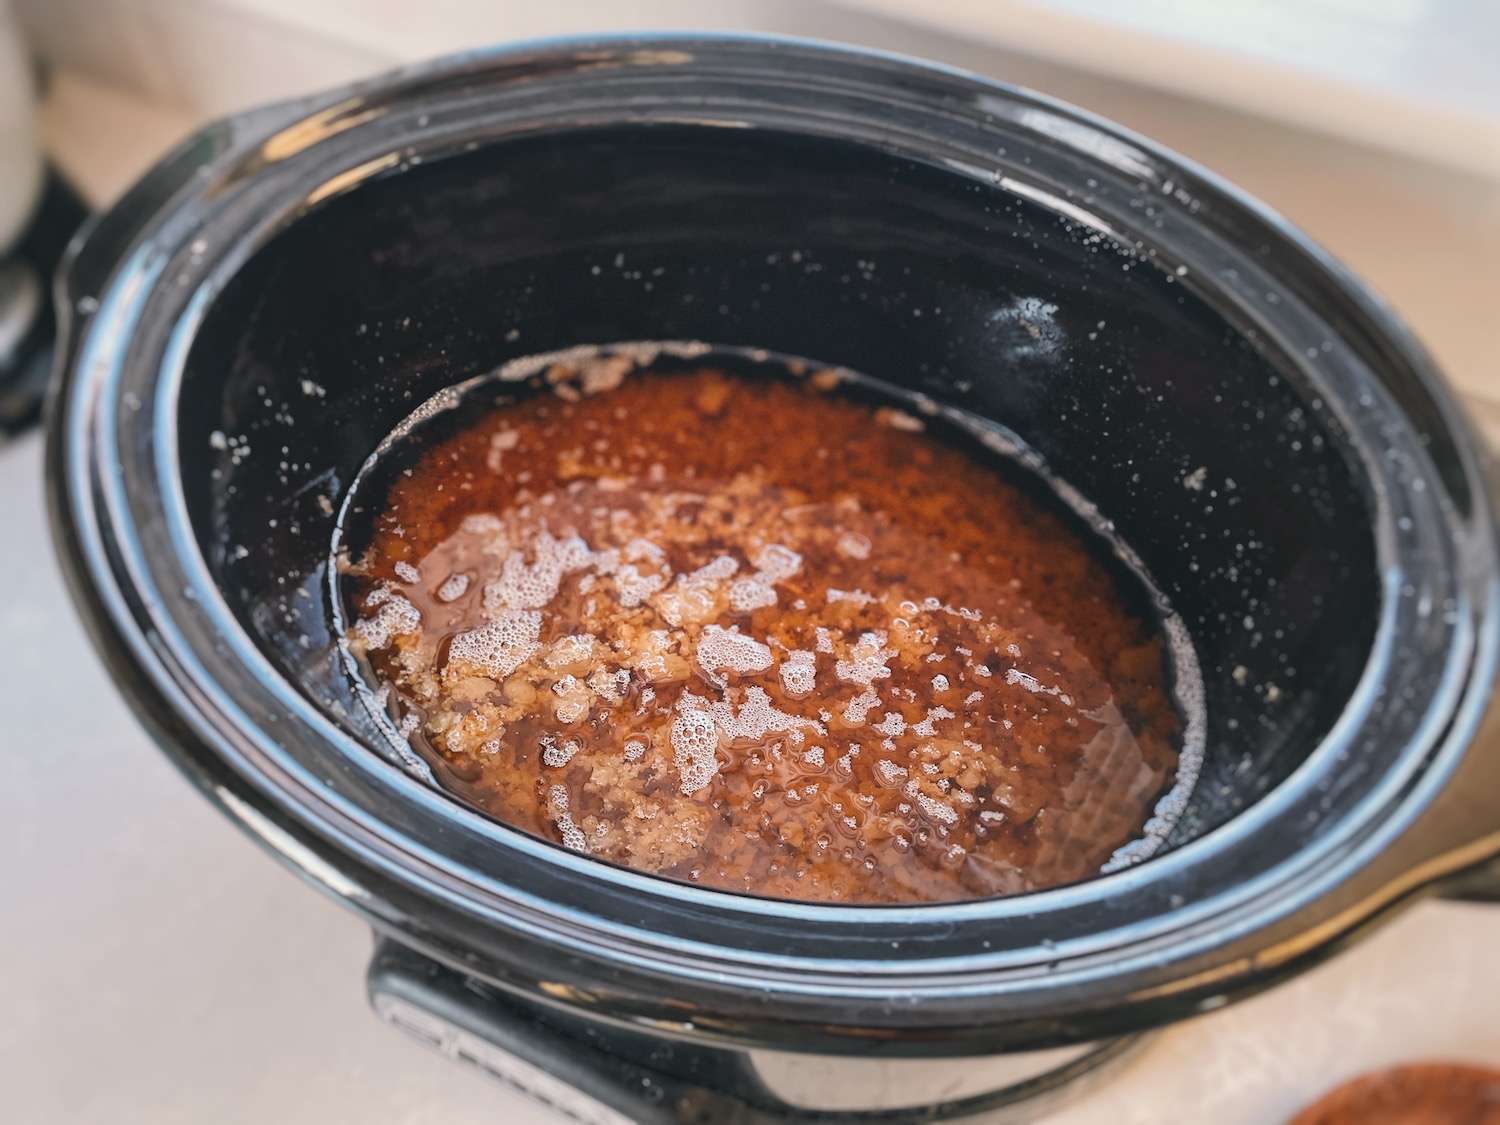 A crockpot filled with golden rendered down tallow with cracklings